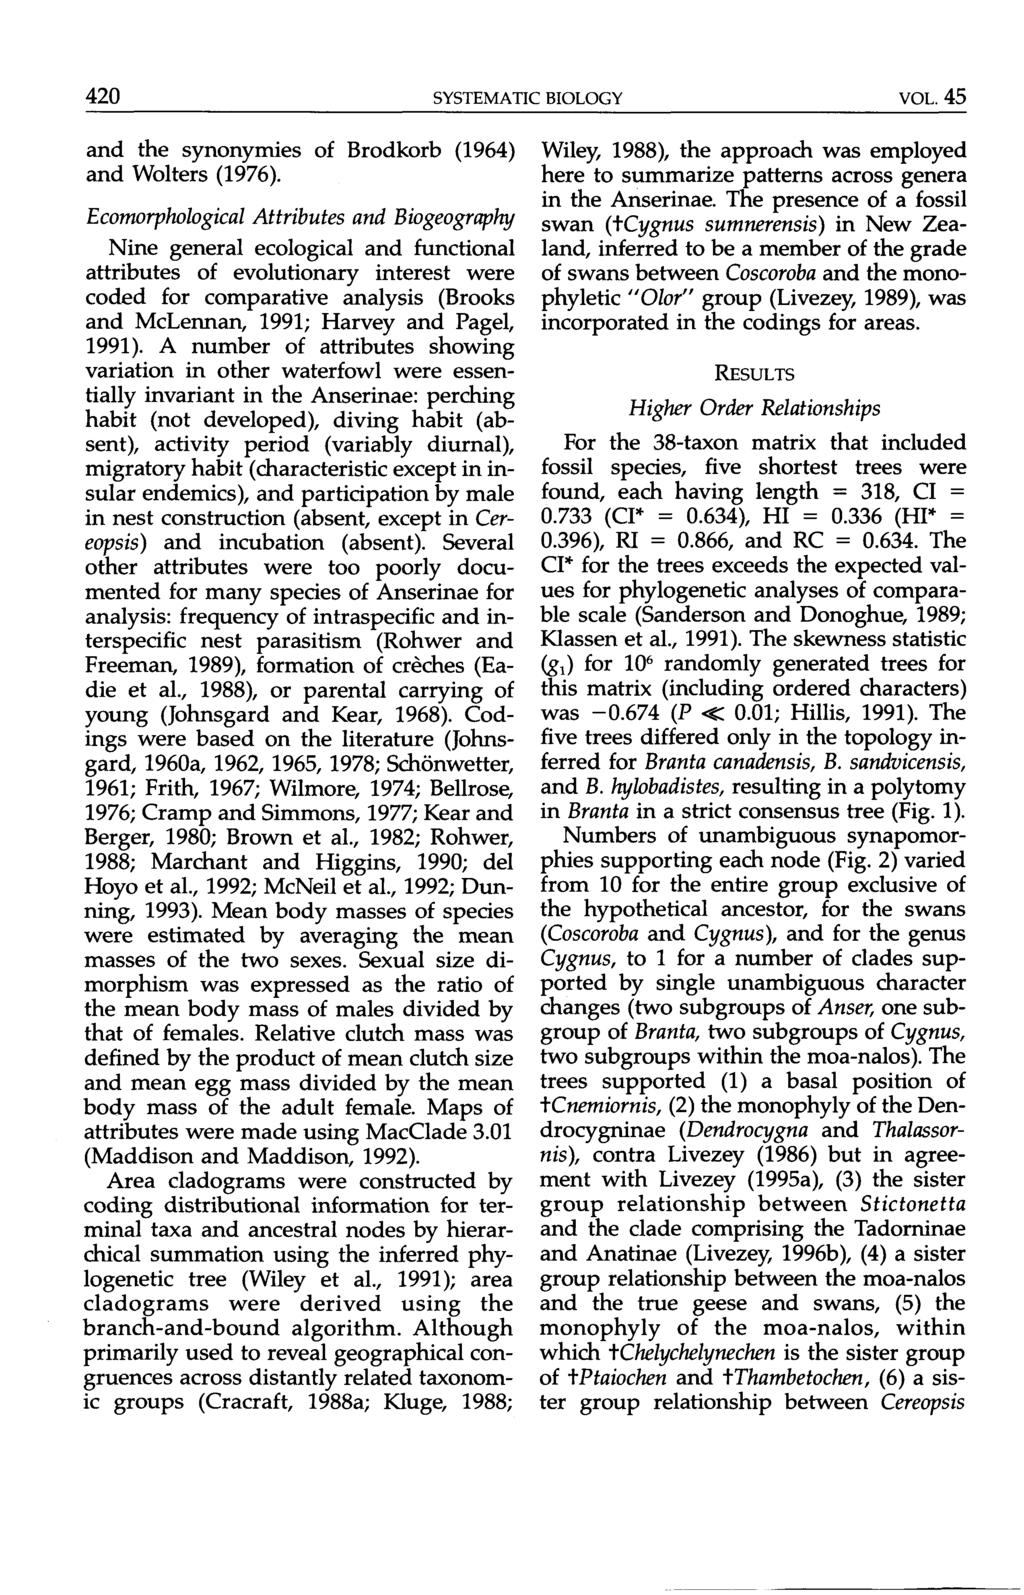 420 SYSTEMATIC BIOLOGY VOL. 45 and the synonymies of Brodkorb (1964) and Wolters (1976). Wiley, 1988), the approach was employed here to summarize patterns across genera in the Anserinae.